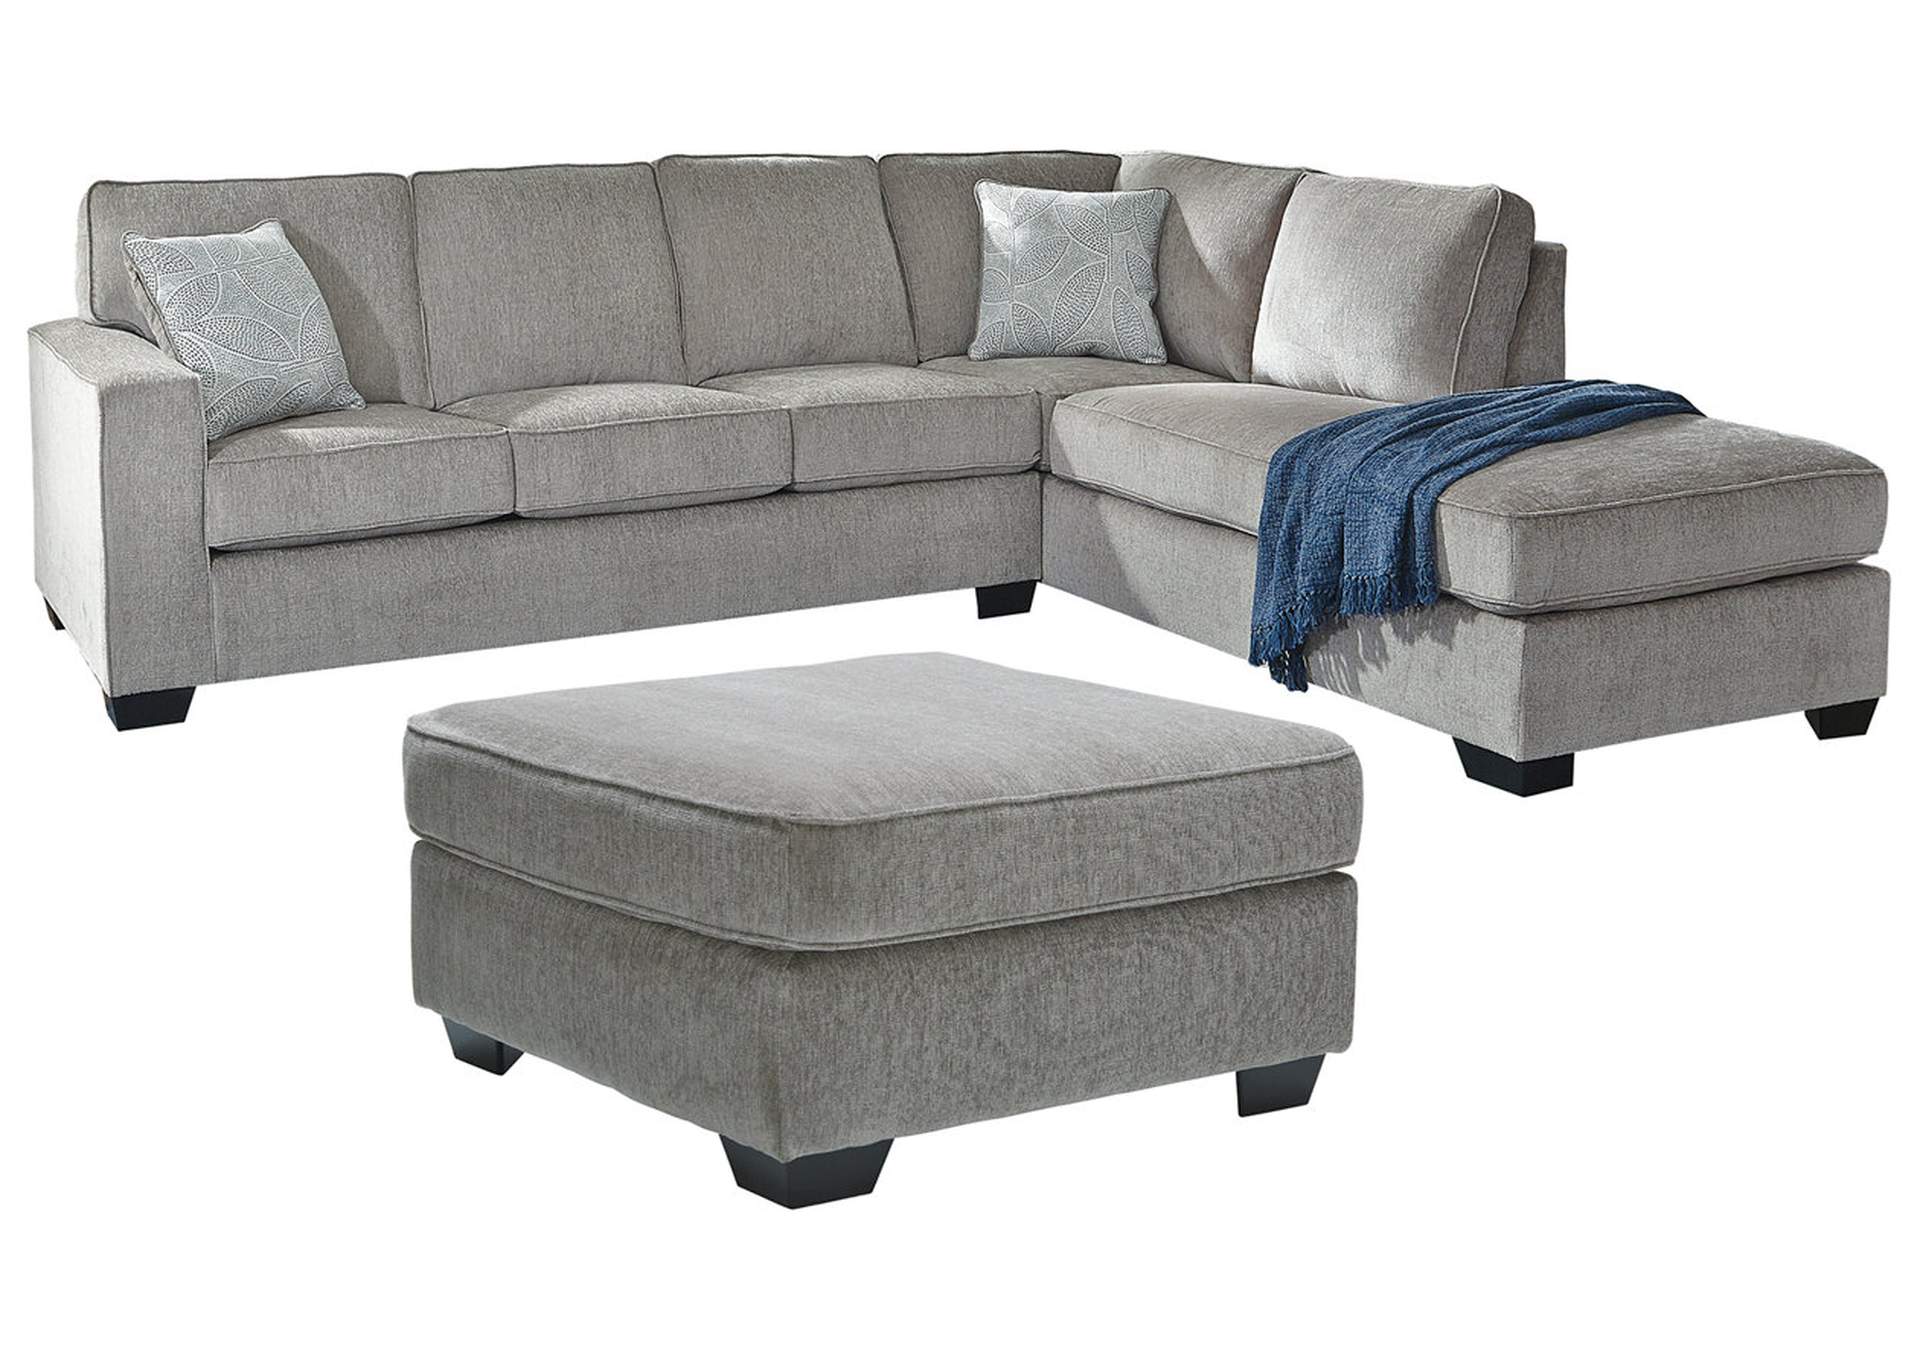 Altari 2-Piece Sleeper Sectional with Ottoman,Signature Design By Ashley